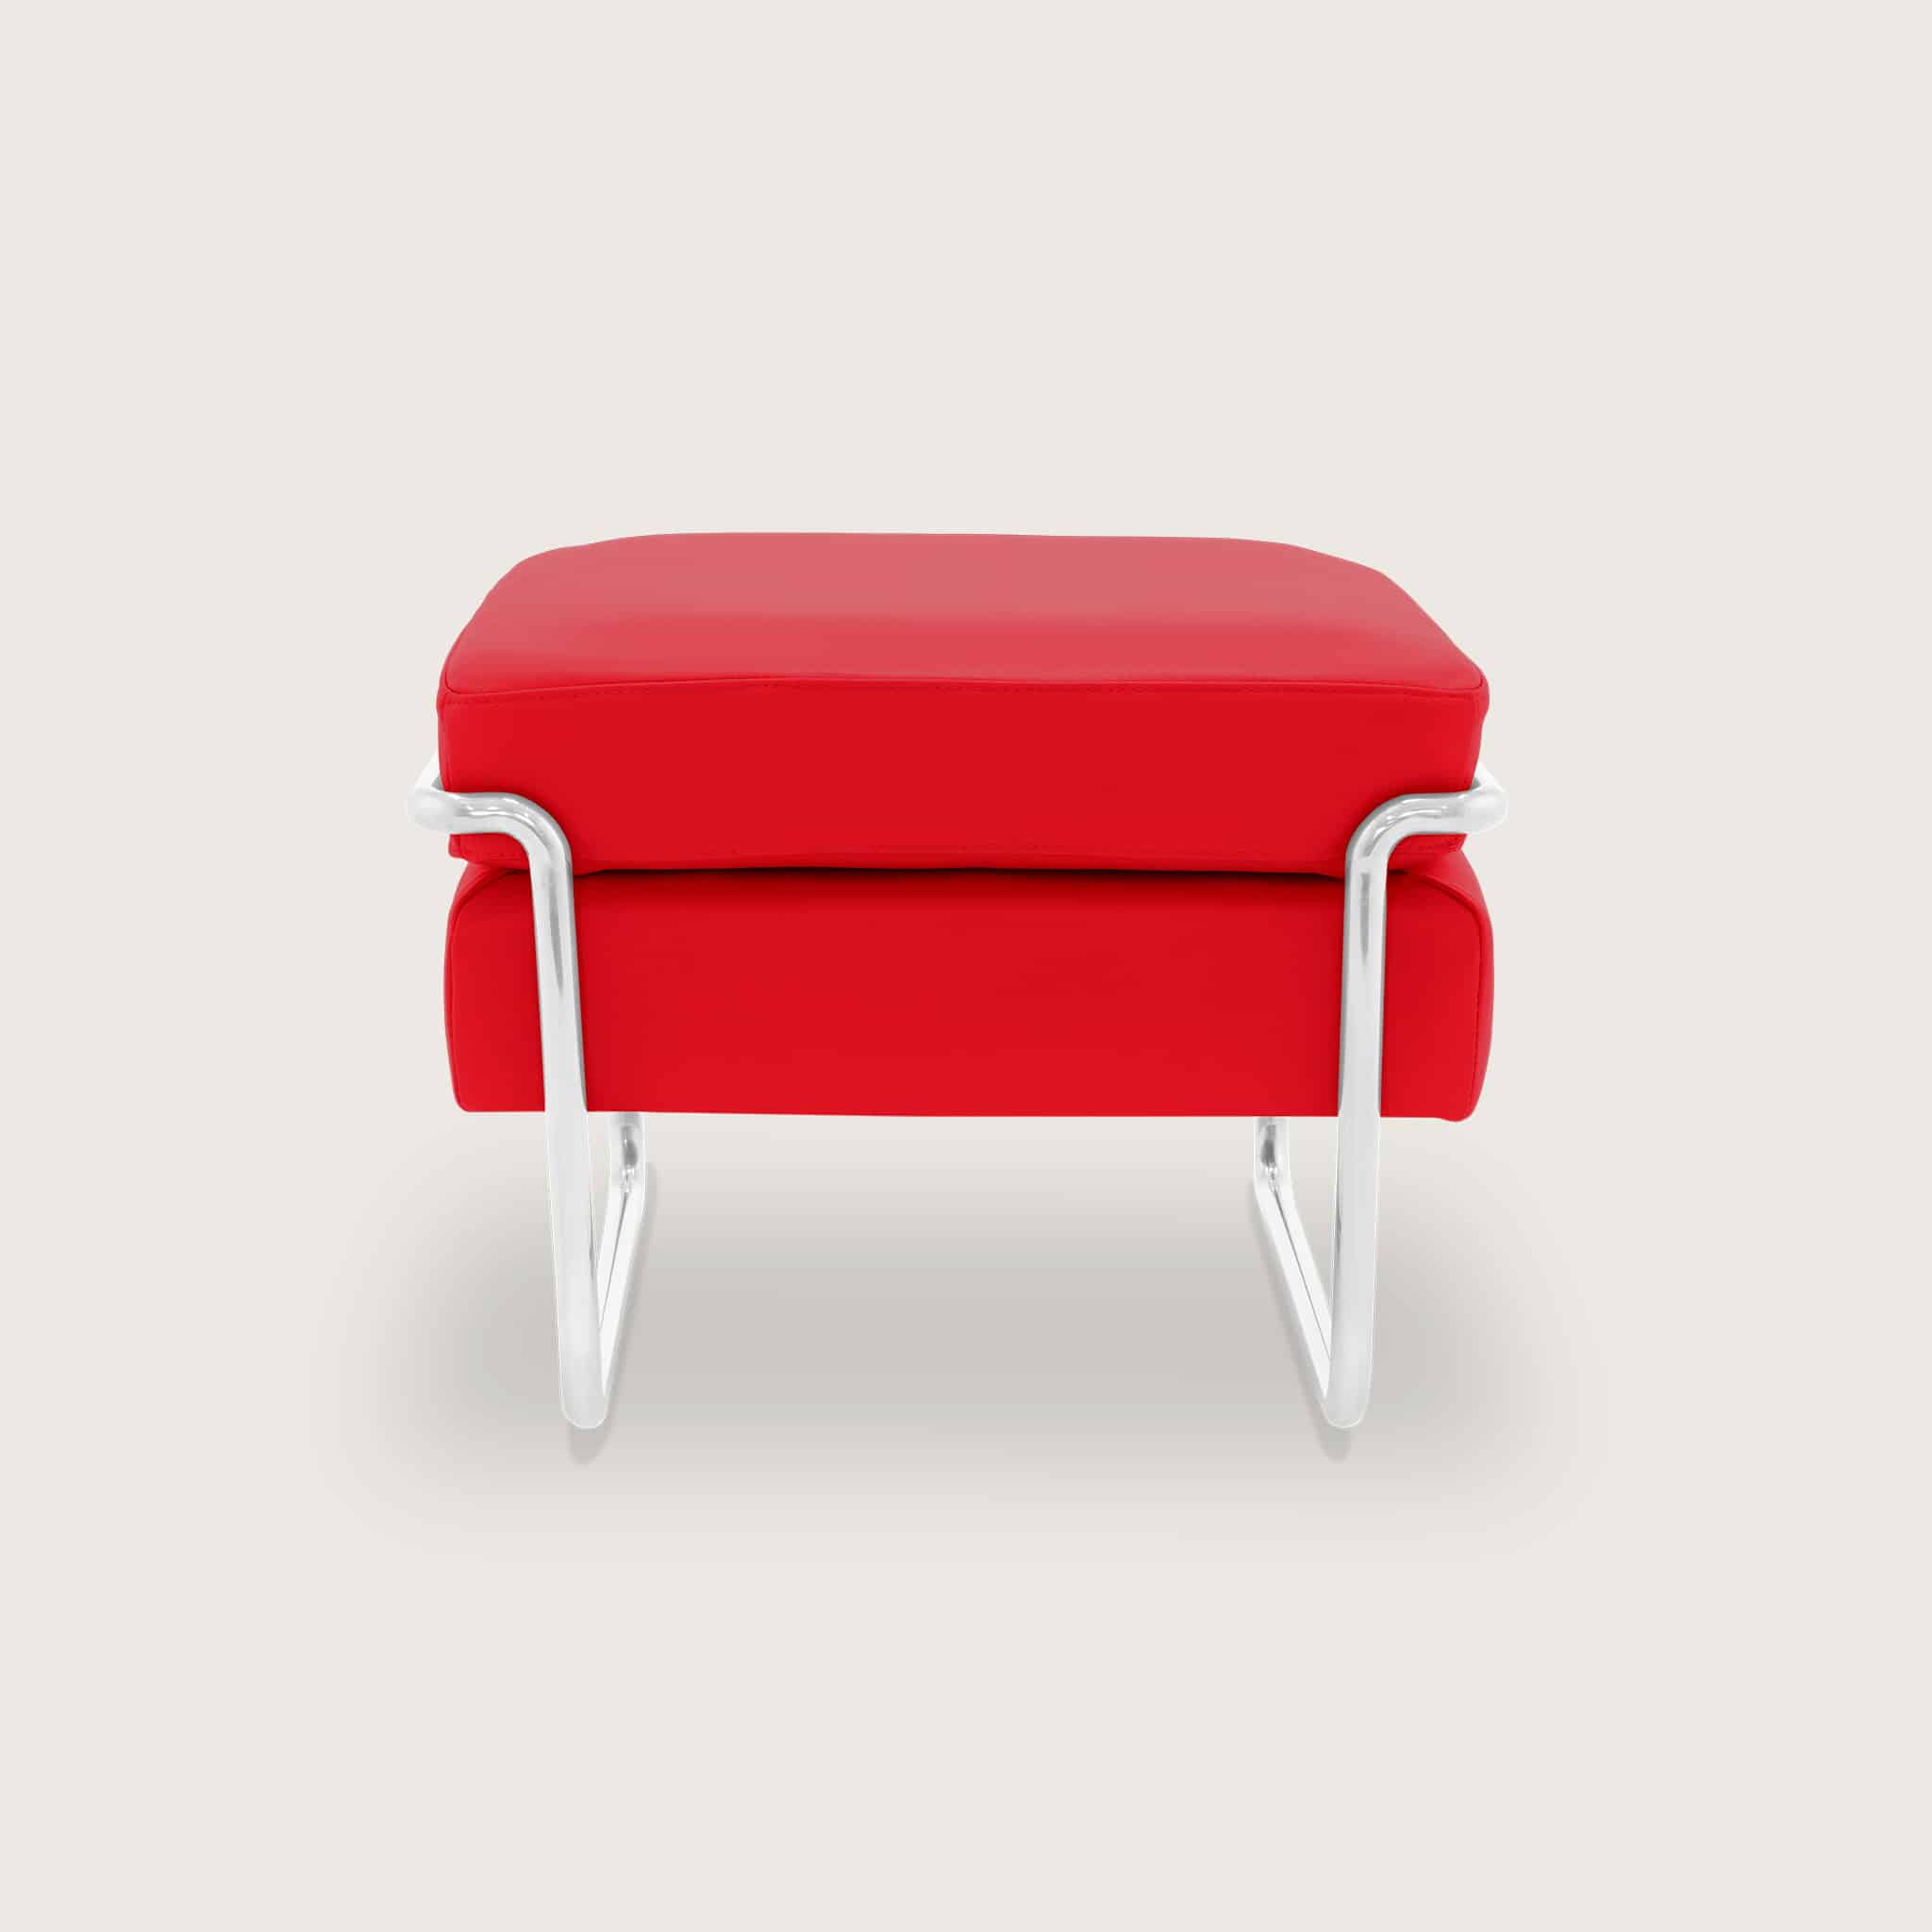 Le Bauhaus Dragon Red Leather Stool 2